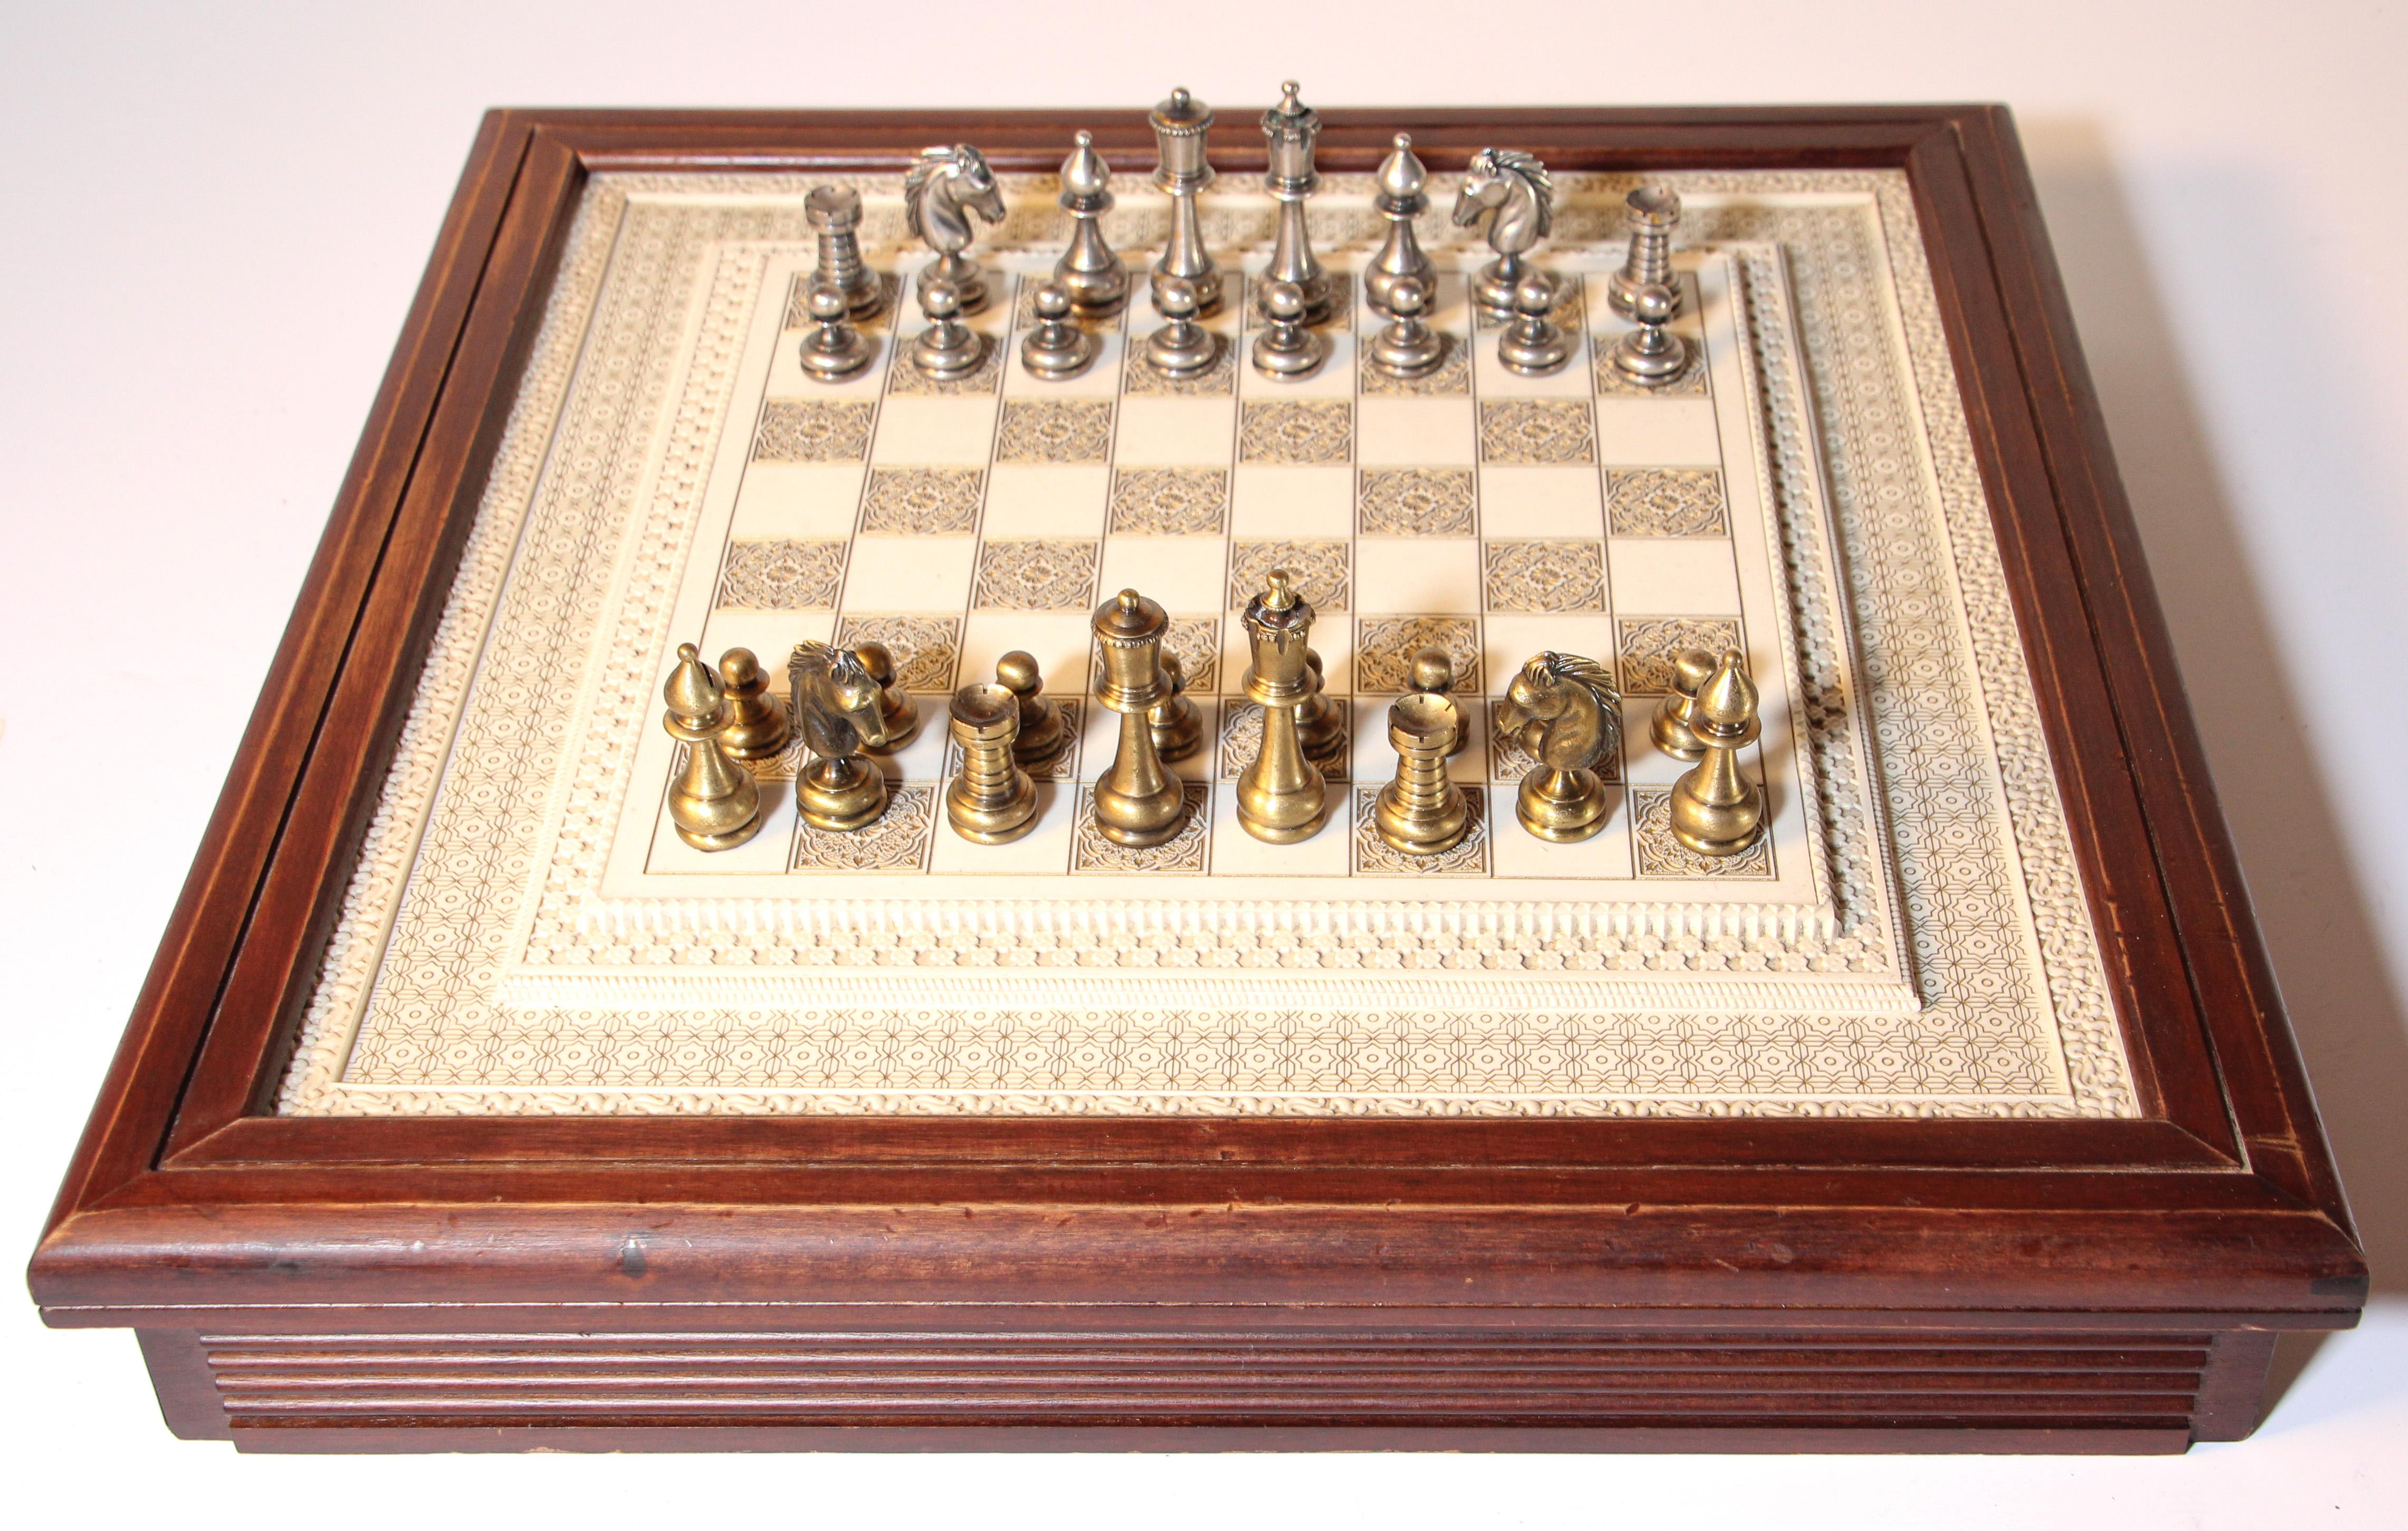 Large Arabesque Firenze Florence Italian game chess set with elaborately carved board in Moorish style with brass and nickel plated Firenze chess pieces.
Each Metal silver and gold finish piece is felted in the bottom and marked 